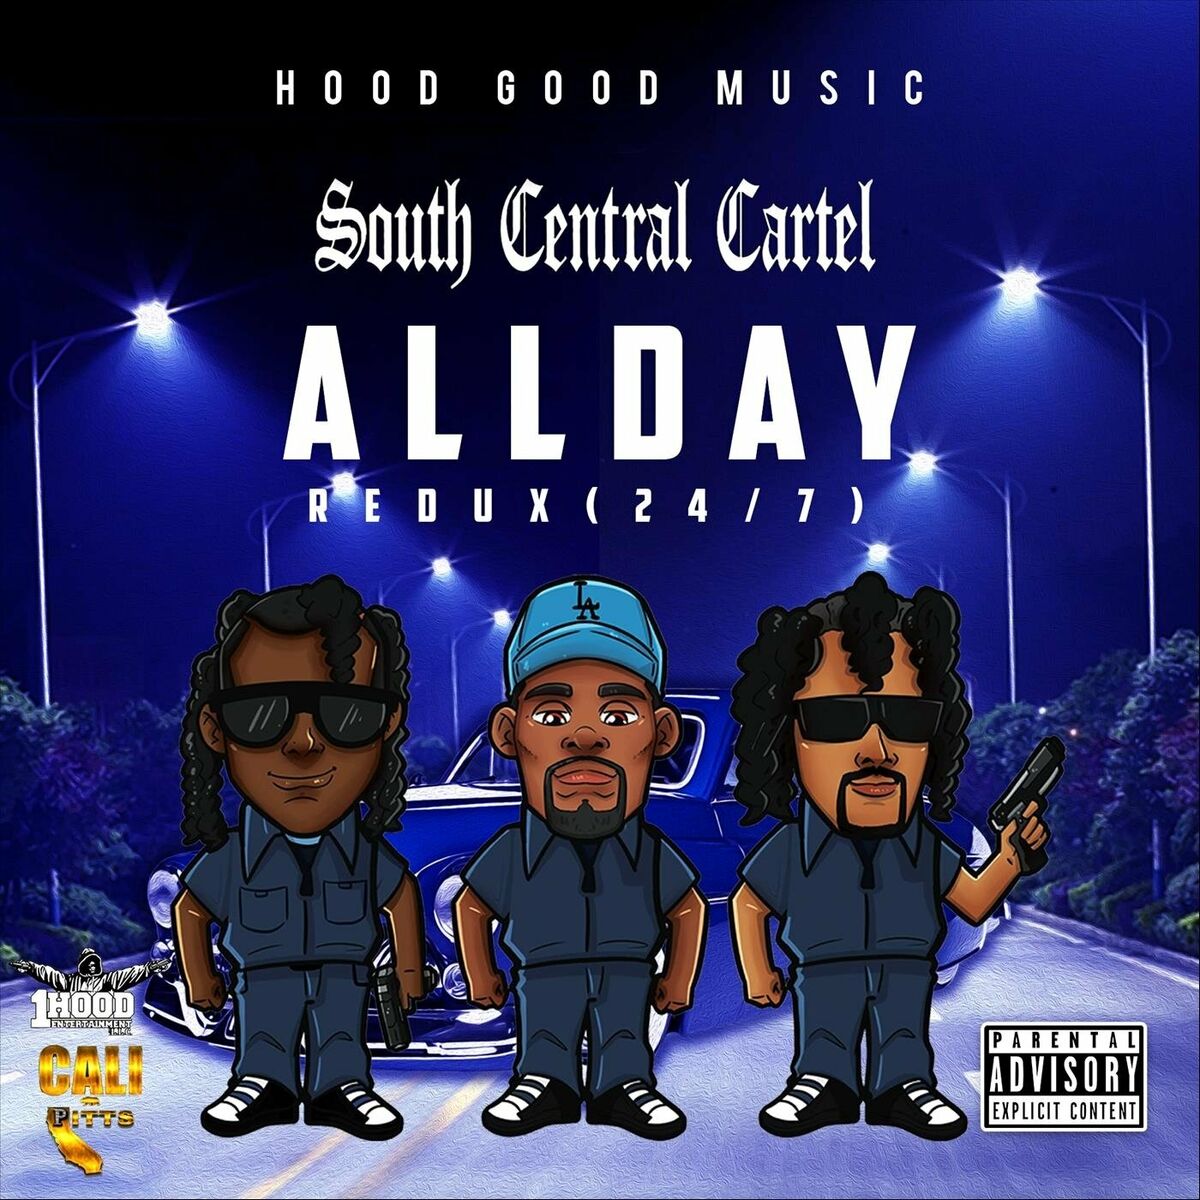 South Central Cartel: albums, songs, playlists | Listen on Deezer